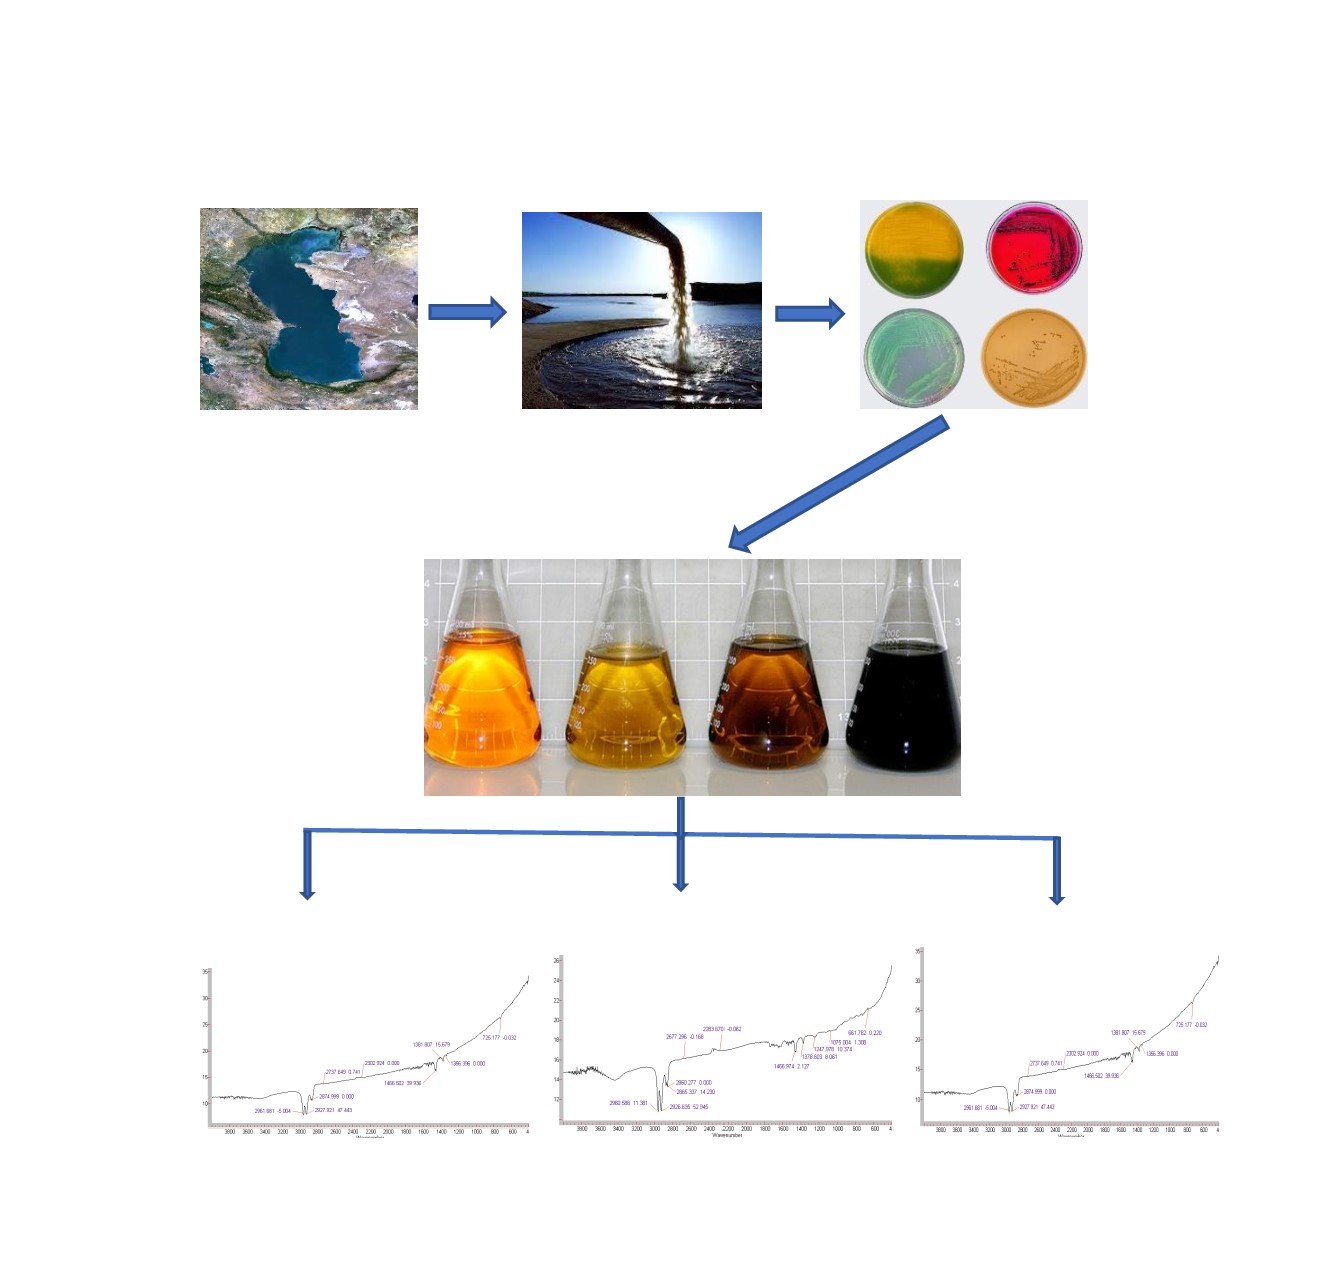 Degradation of oil and oil products by microorganisms isolated from the Azerbaijani coast of the Caspian Sea at low temperatures